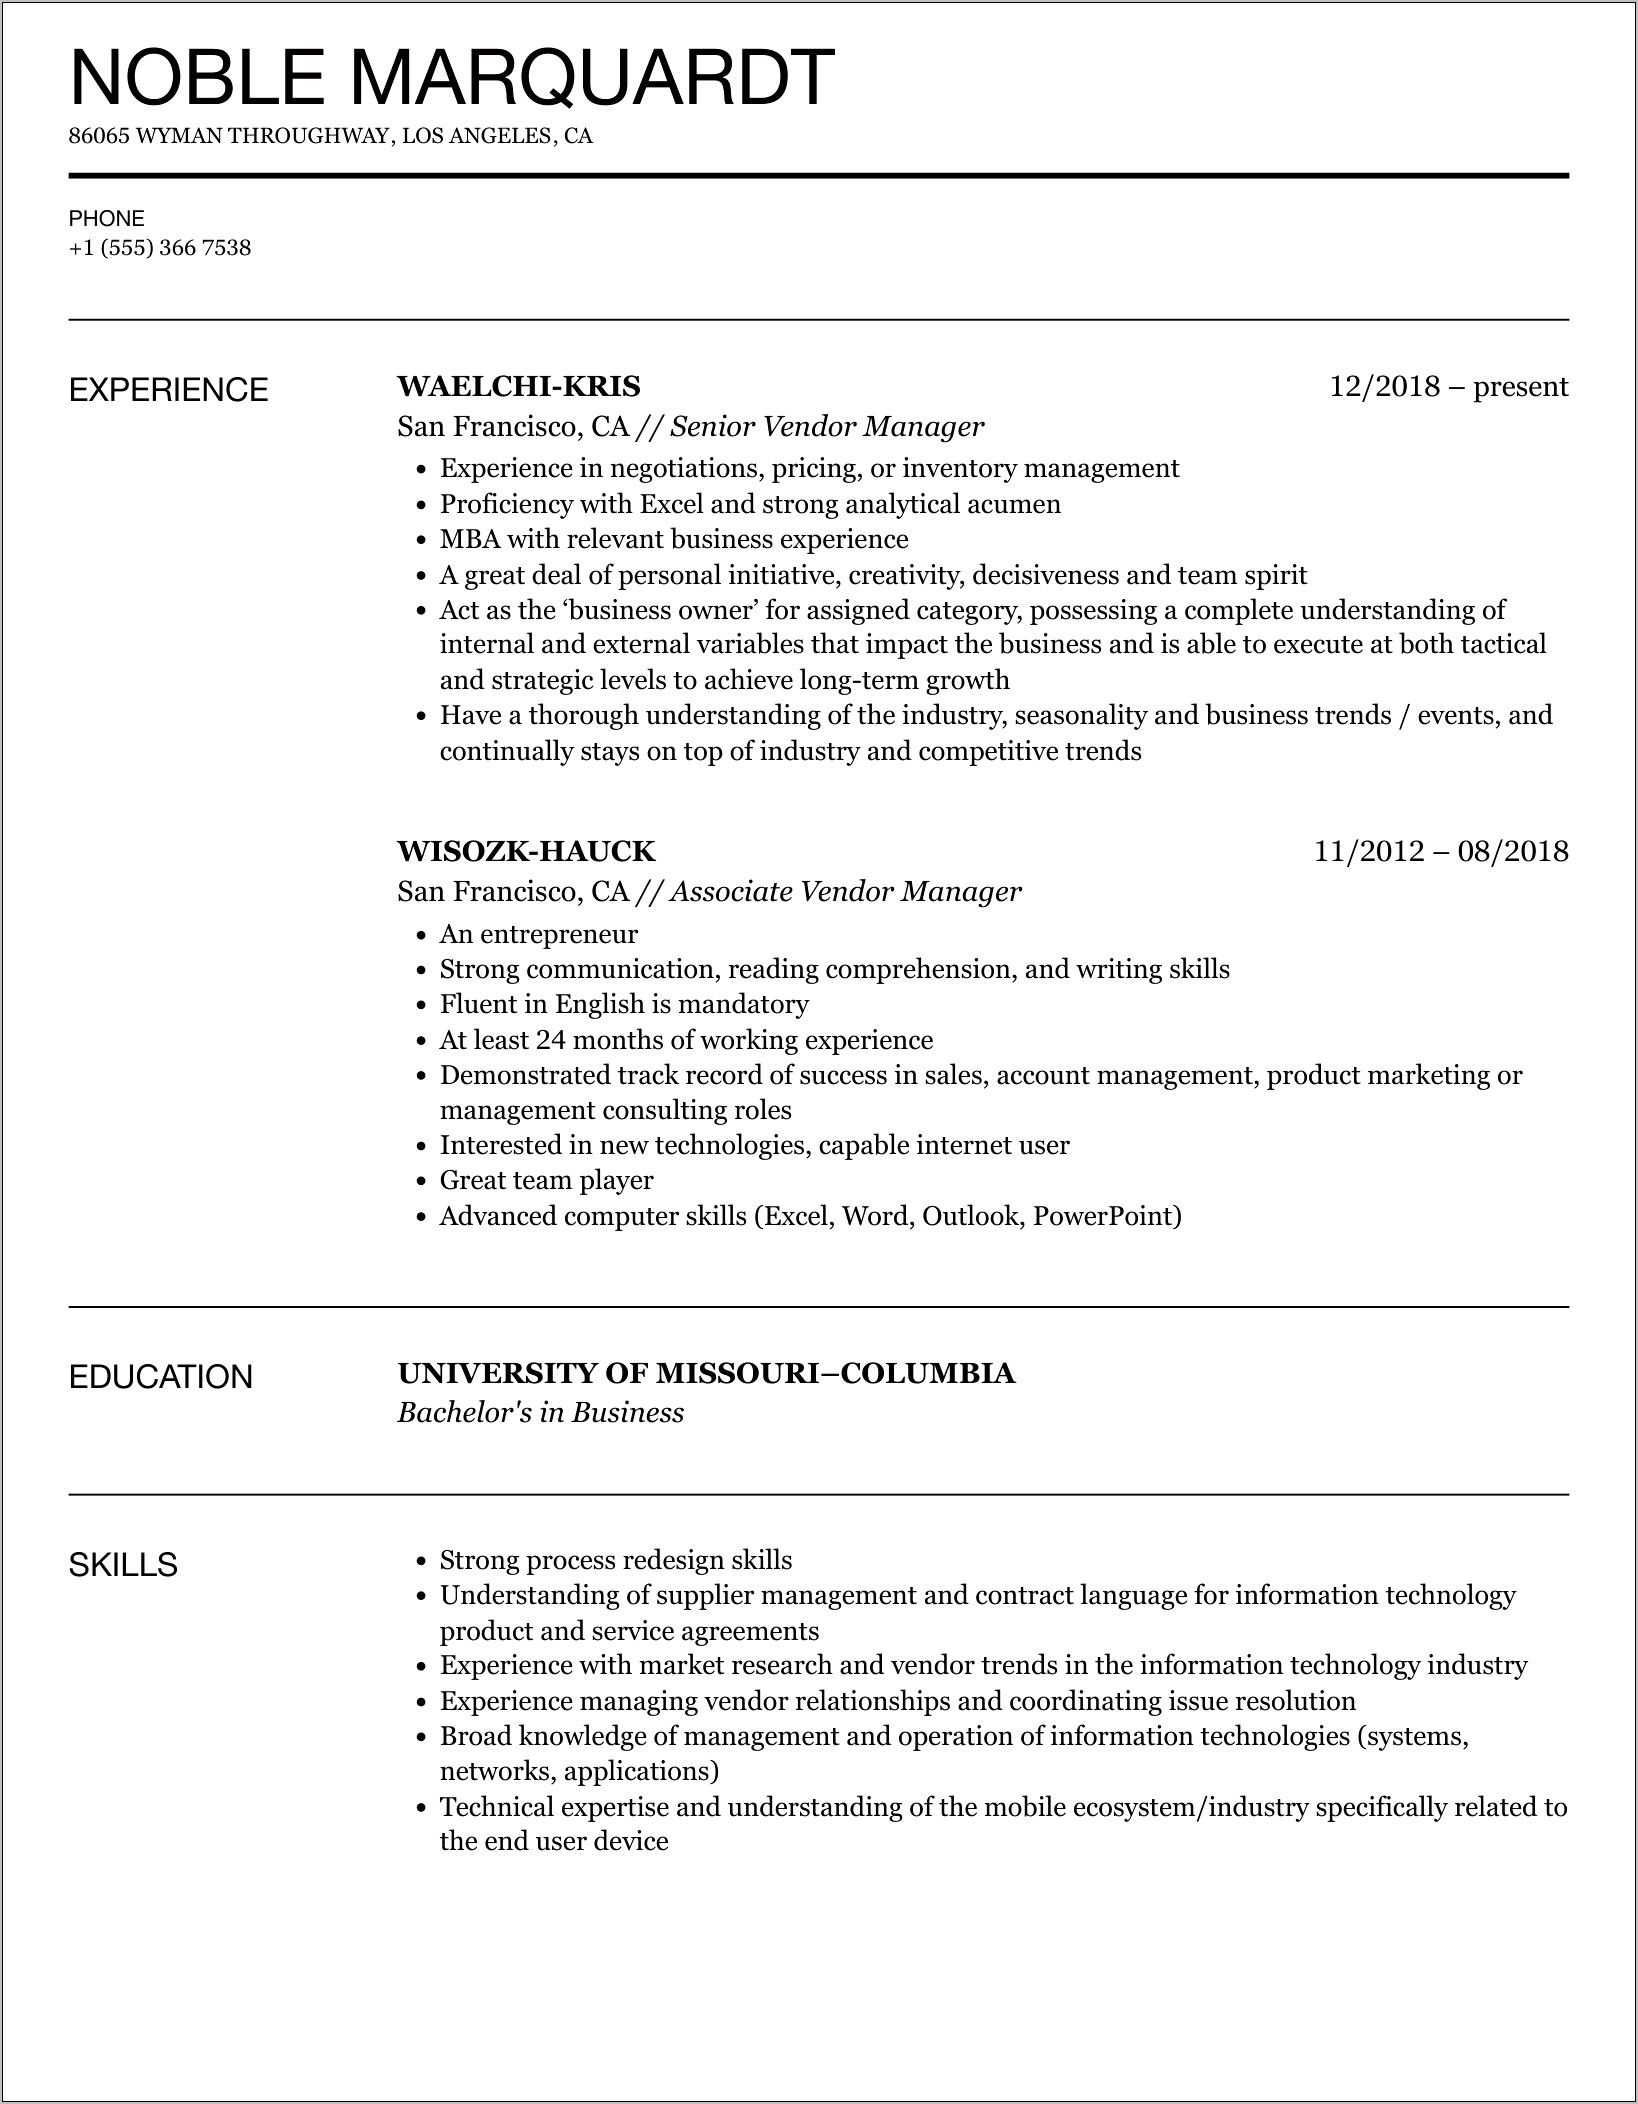 Healthcare Vendor Manager Resume Examples